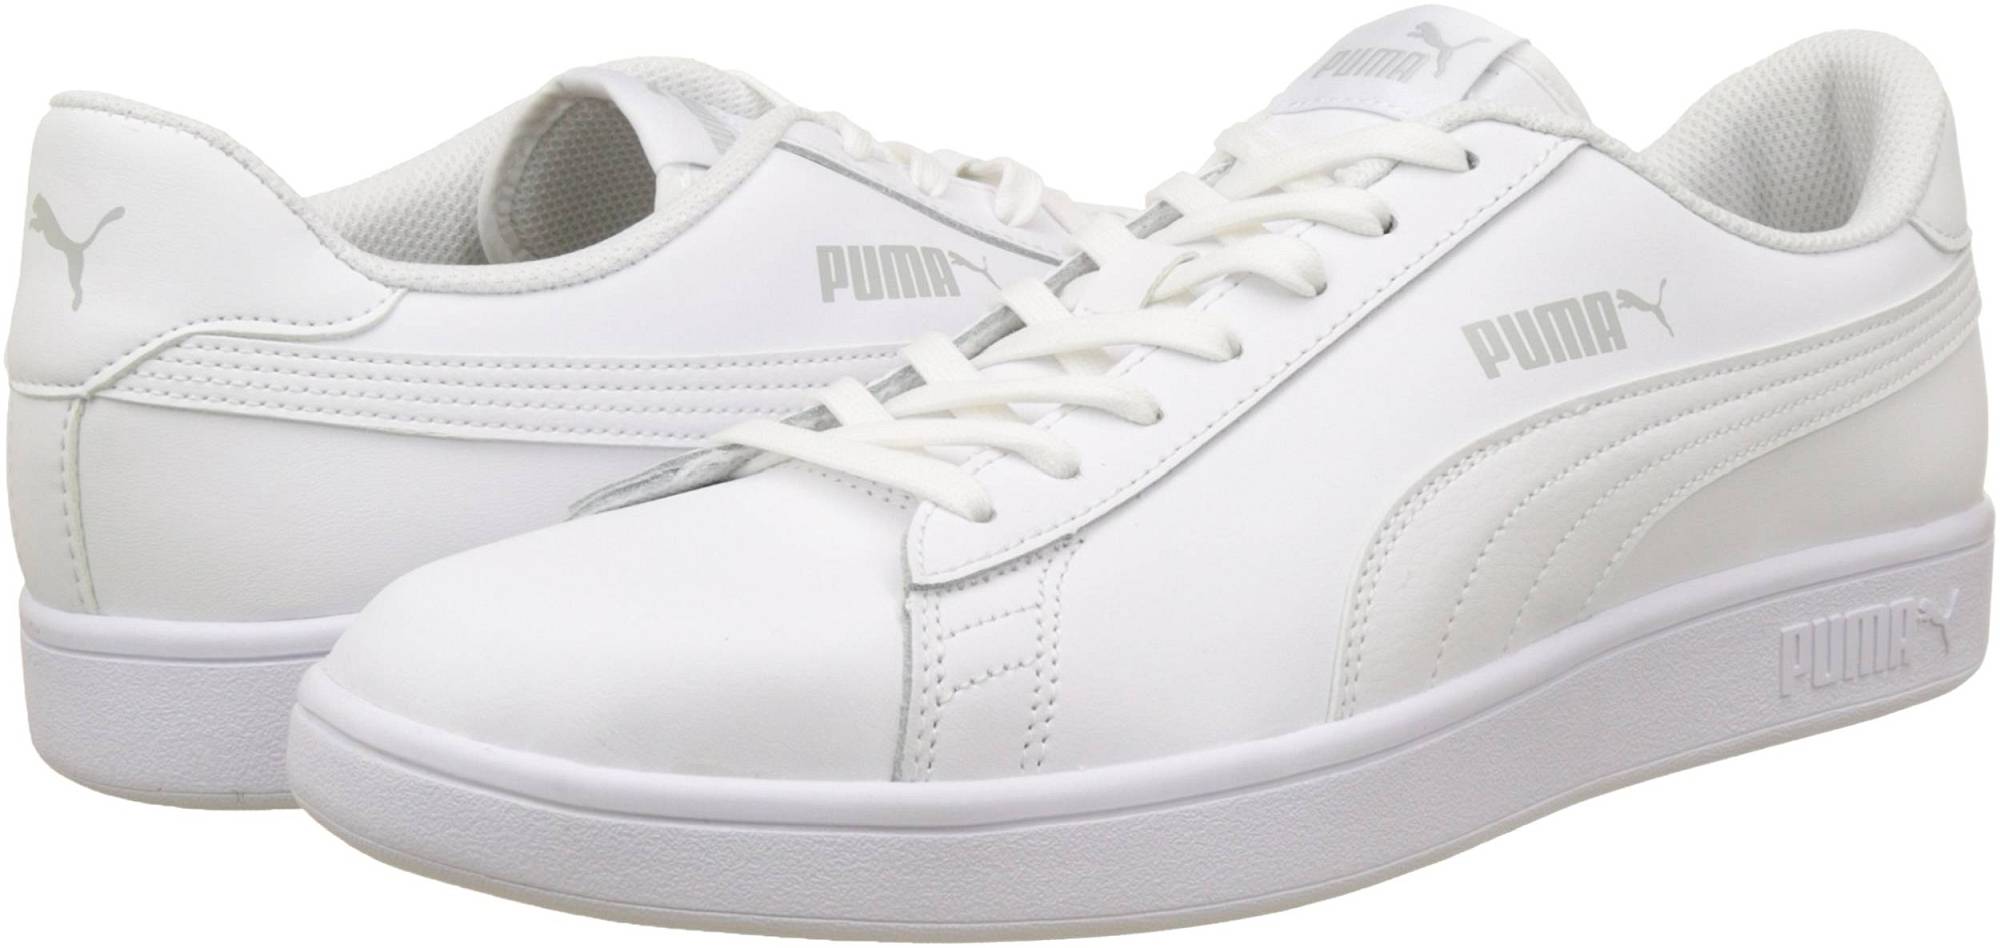 Puma Smash v2 Leather – Shoes Reviews & Reasons To Buy